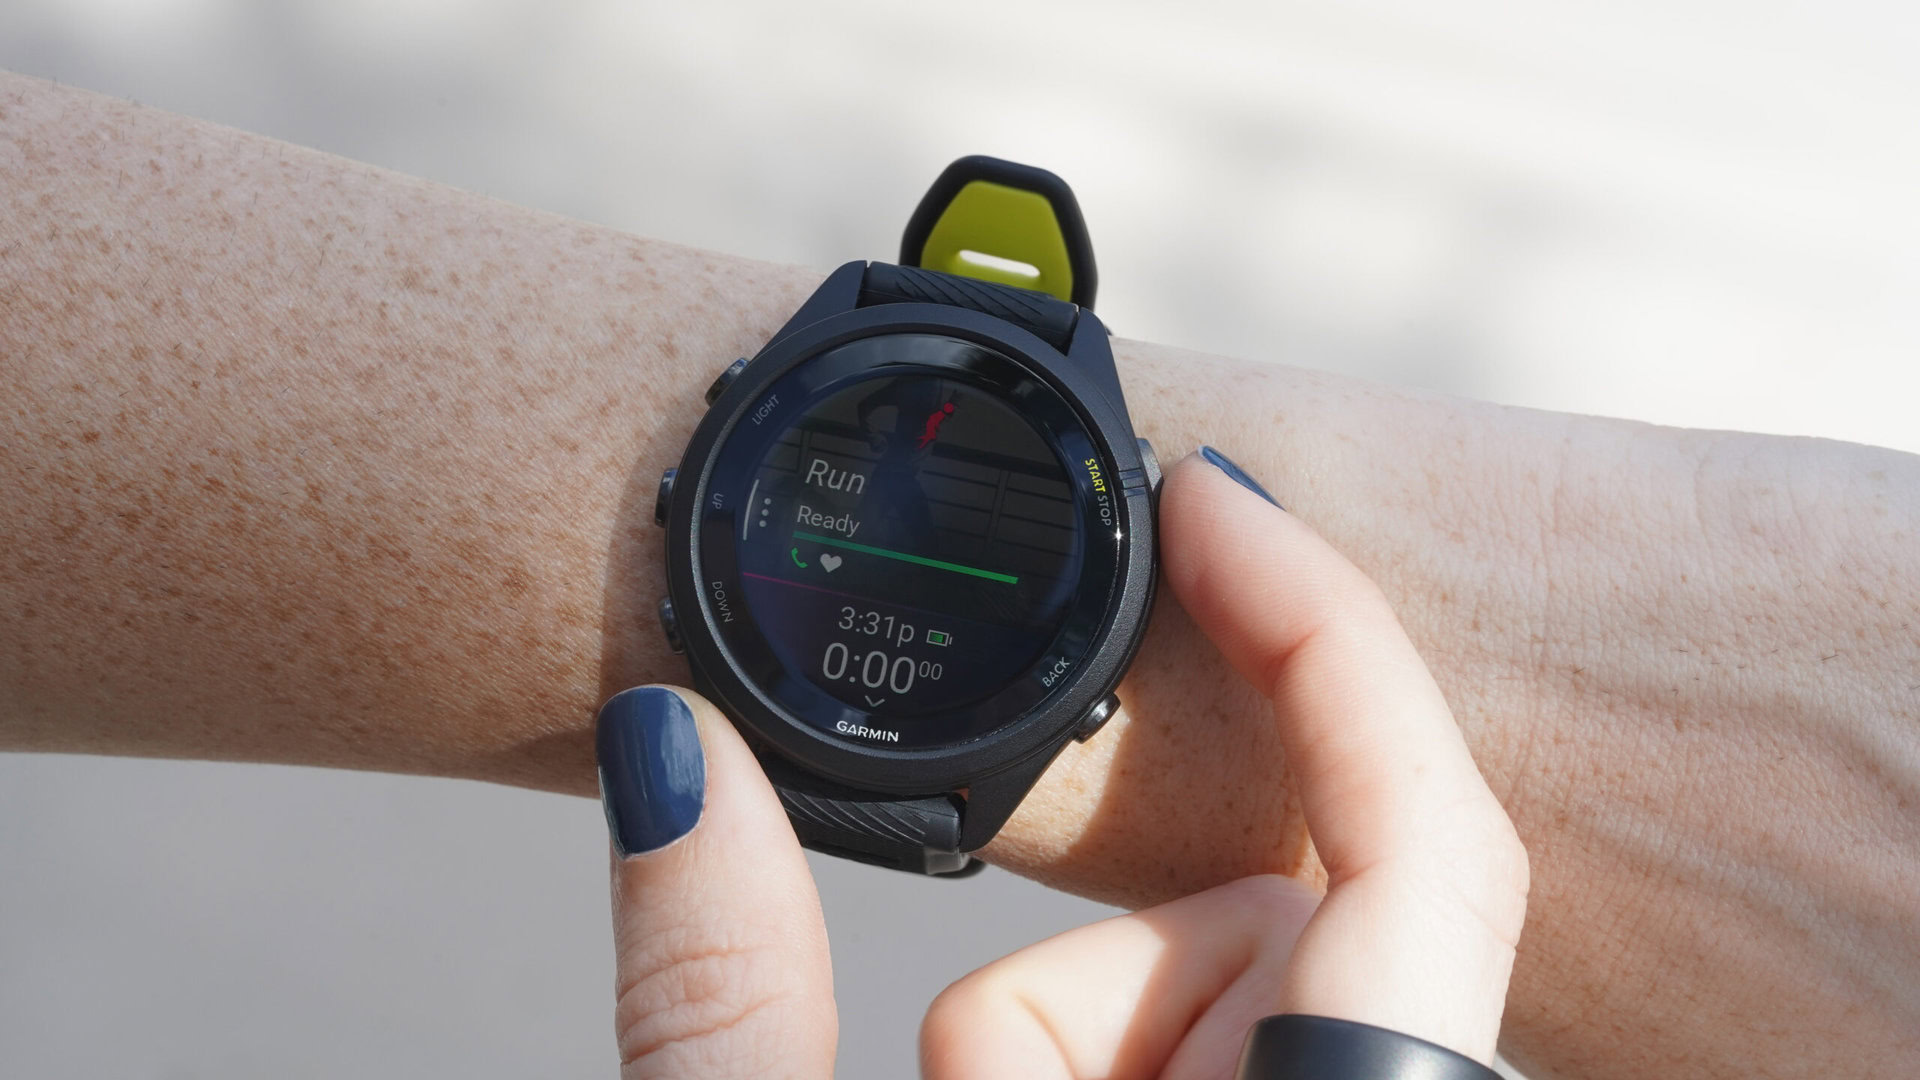 Garmin Forerunner 265 review: Color me impressed - Android Authority